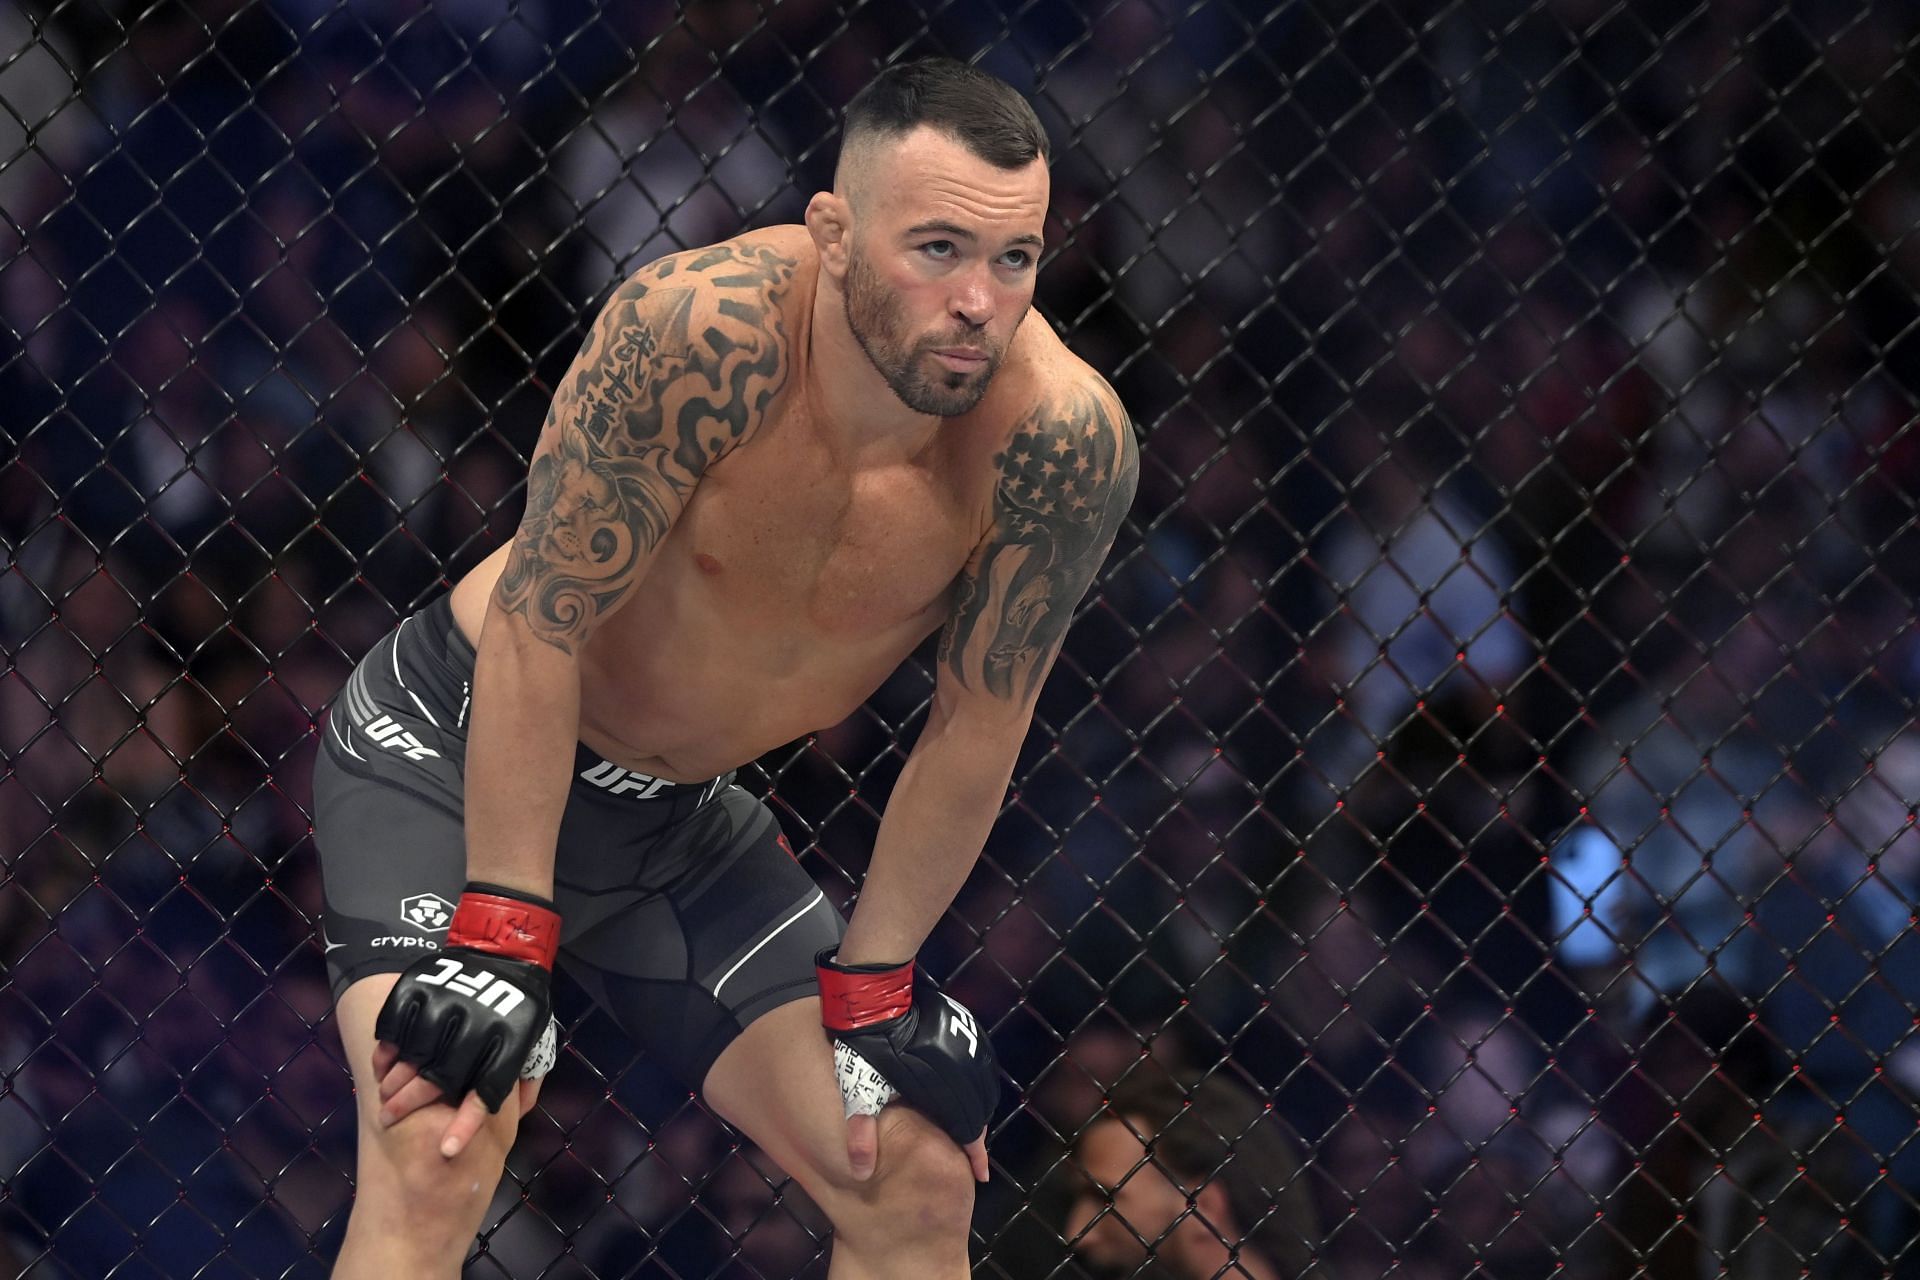 Whether or not he&#039;s playing a character, Colby Covington has become a highly effective villain